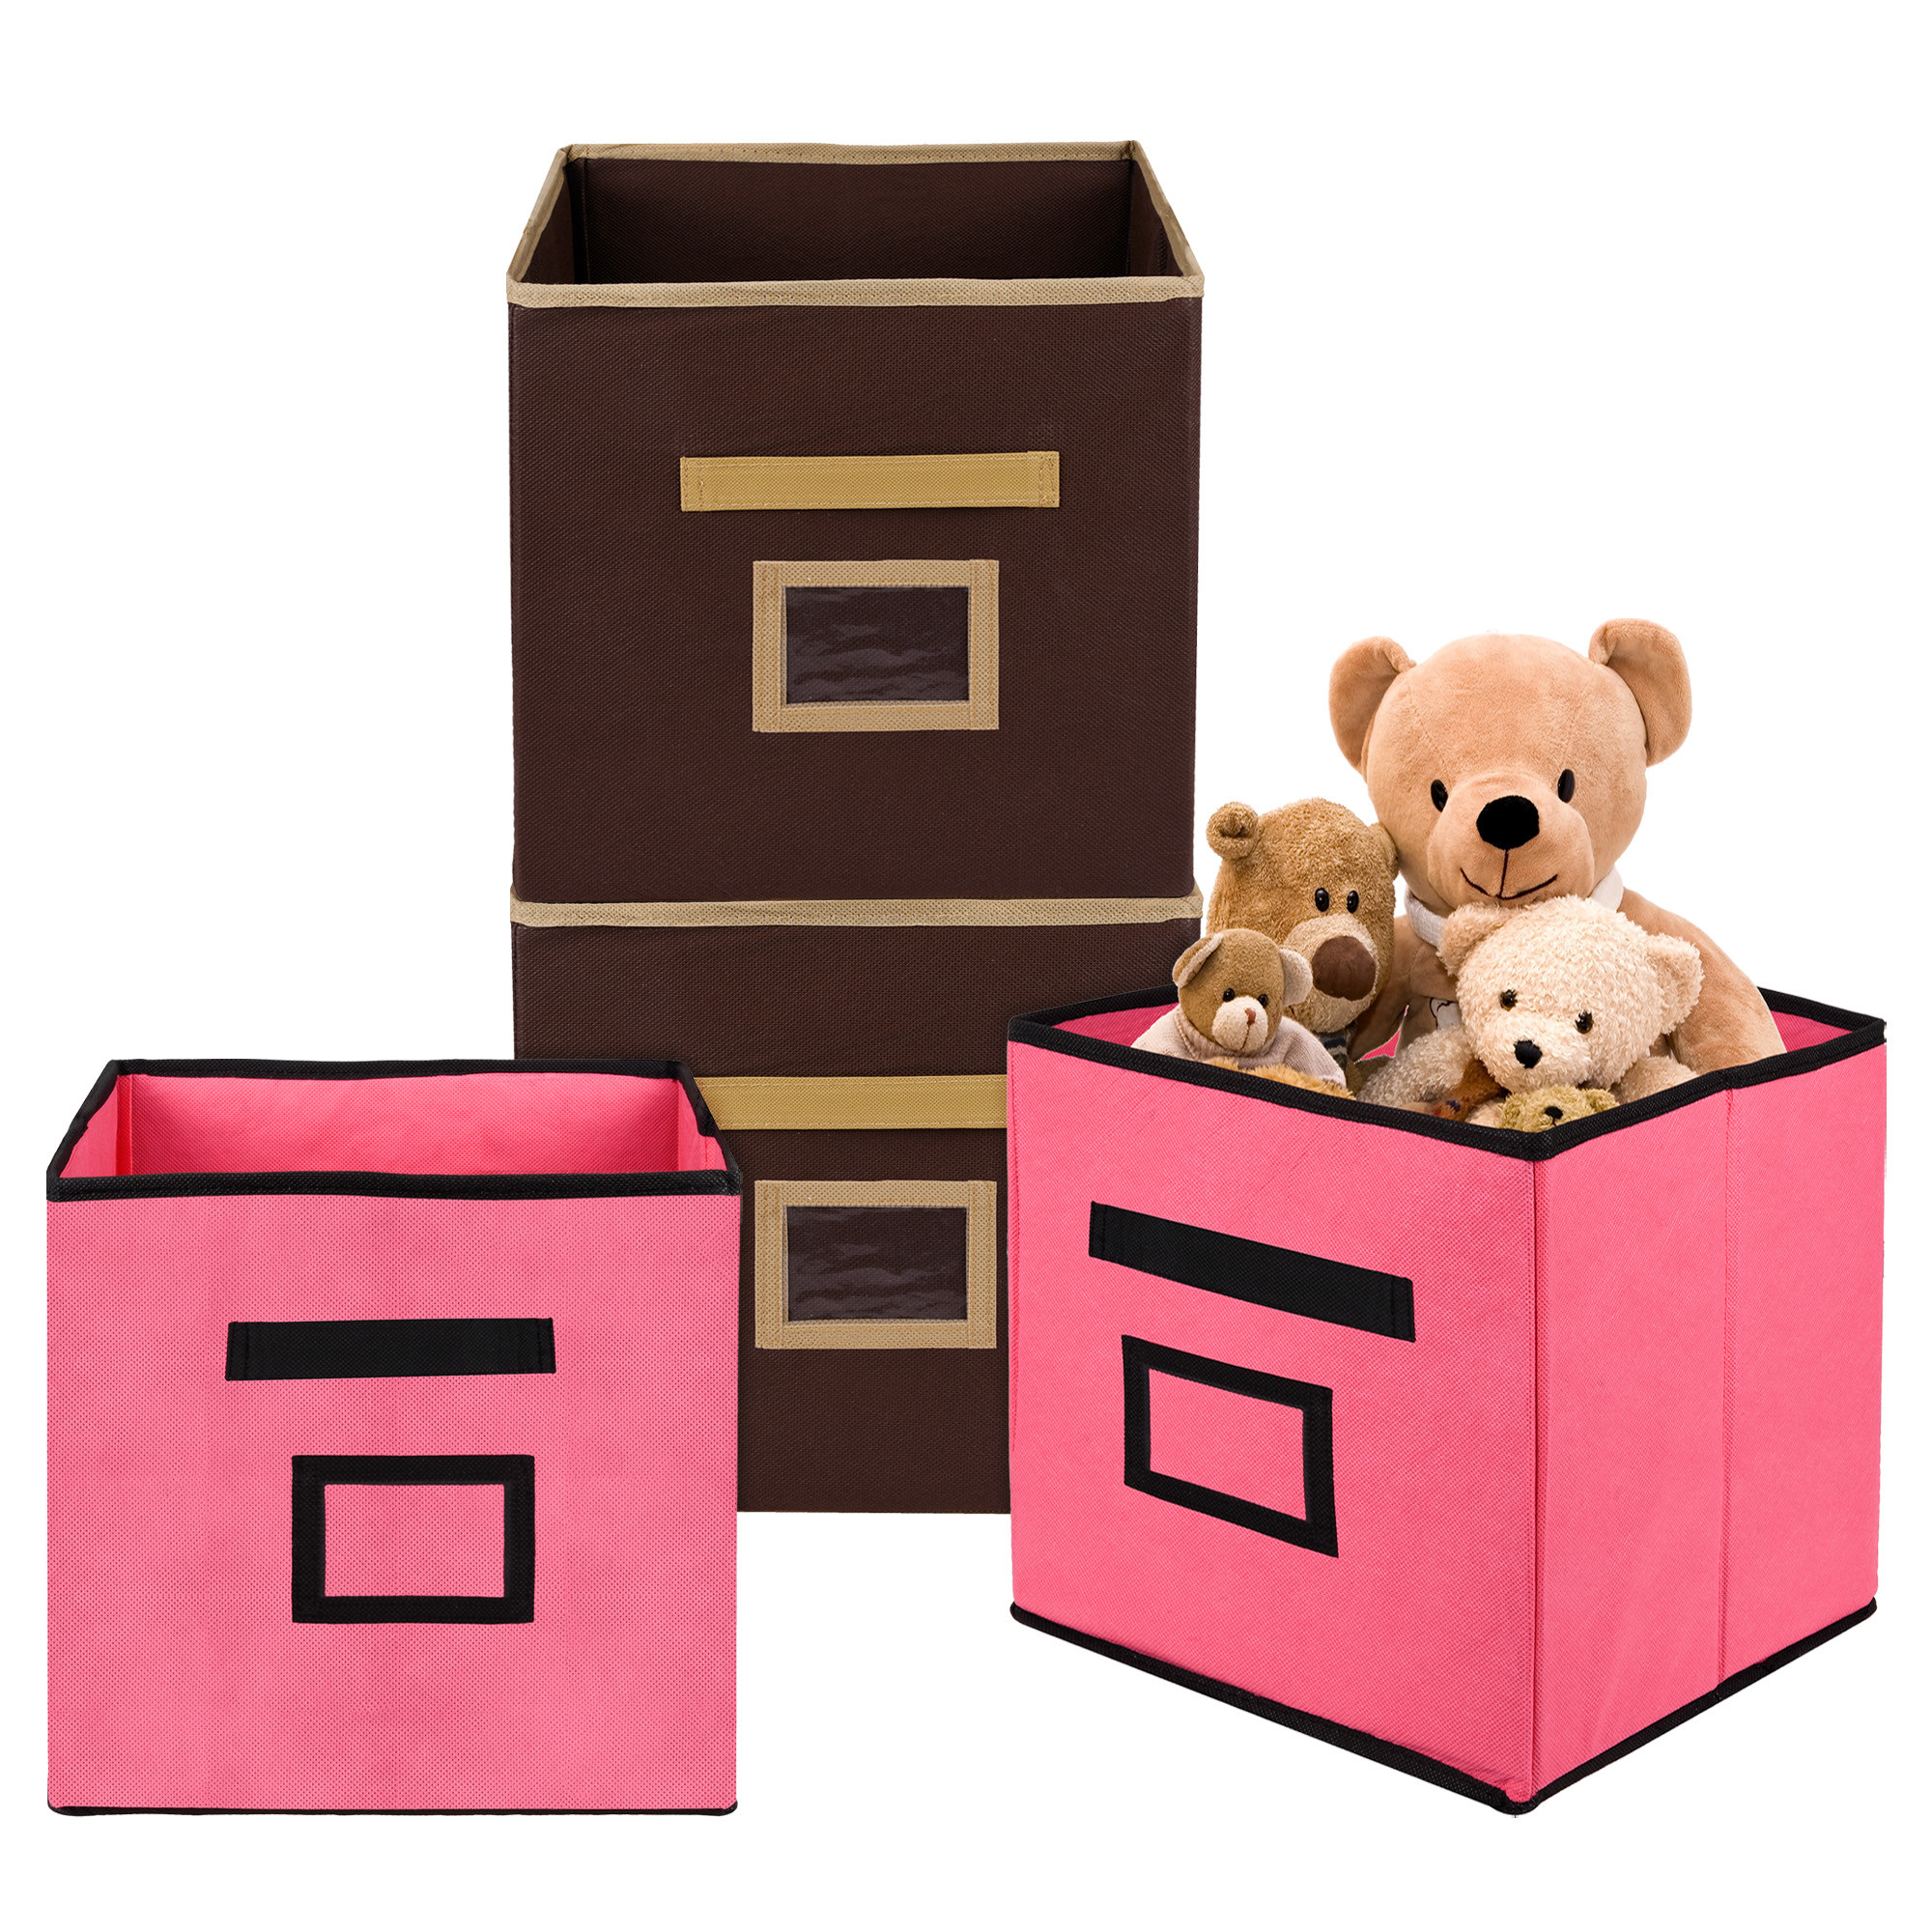 Kuber Industries Storage Box | Square Toy Storage Box | Wardrobe Organizer for Clothes-Books-Toys-Stationary | Drawer Organizer Box with Handle & Name Pocket | Pink & Brown